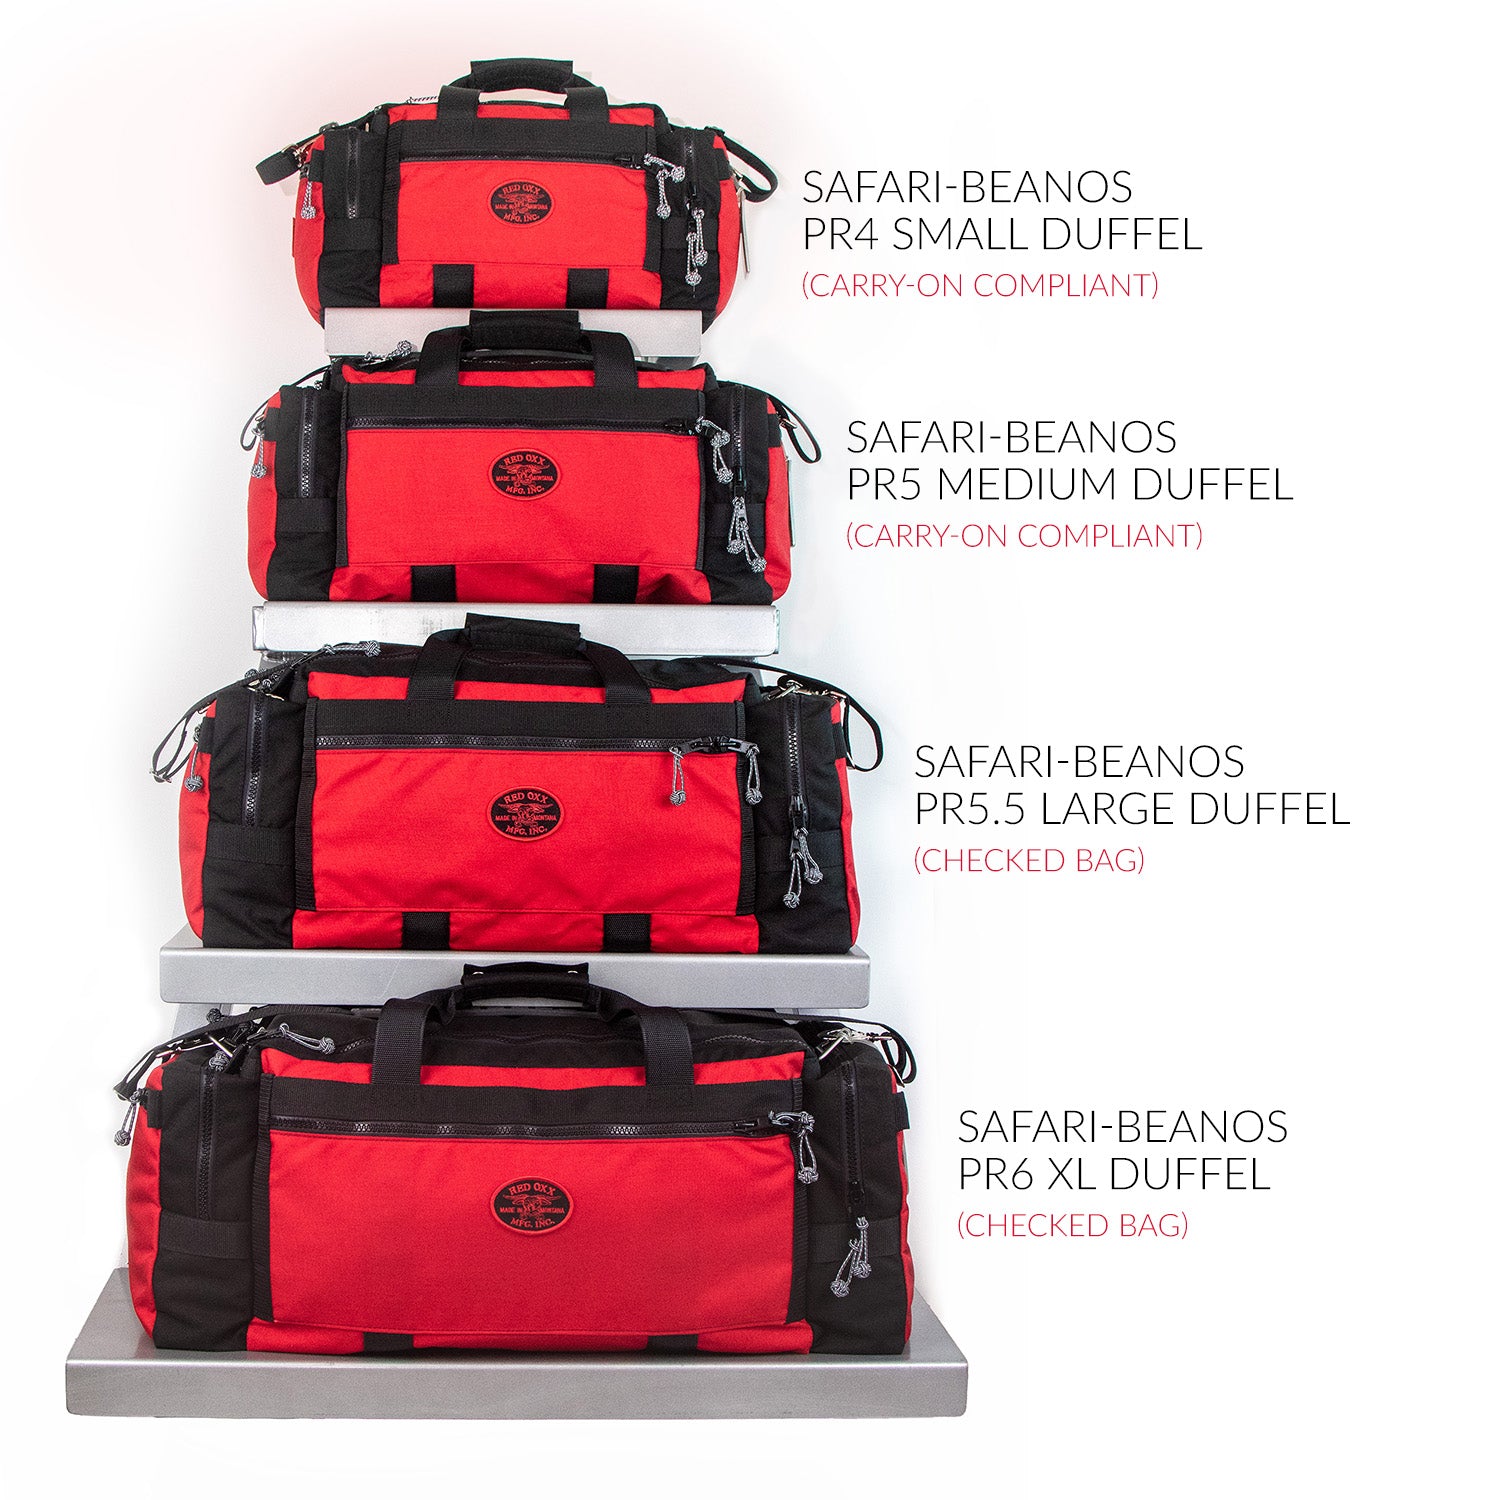 From top to bottom: Safari Beanos PR 4 Carry on Compliant. Safari Beanos PR5 Carry on Compliant.  Safari PR5.5 Checked Bag size, Safari Beano PR6 Checked bag size. 